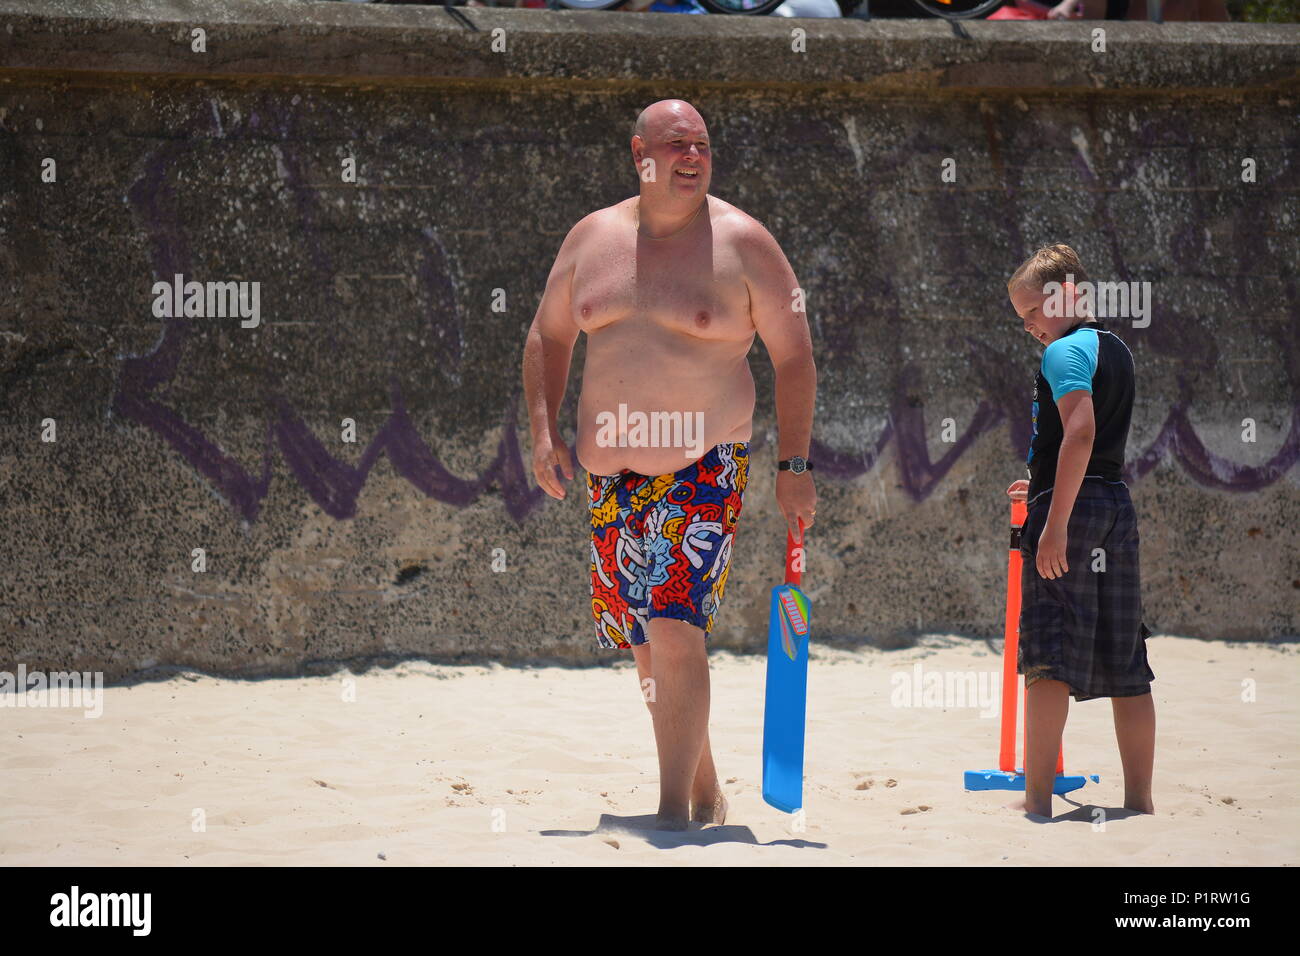 An overweight, obese man playing cricket on beach Stock Photo